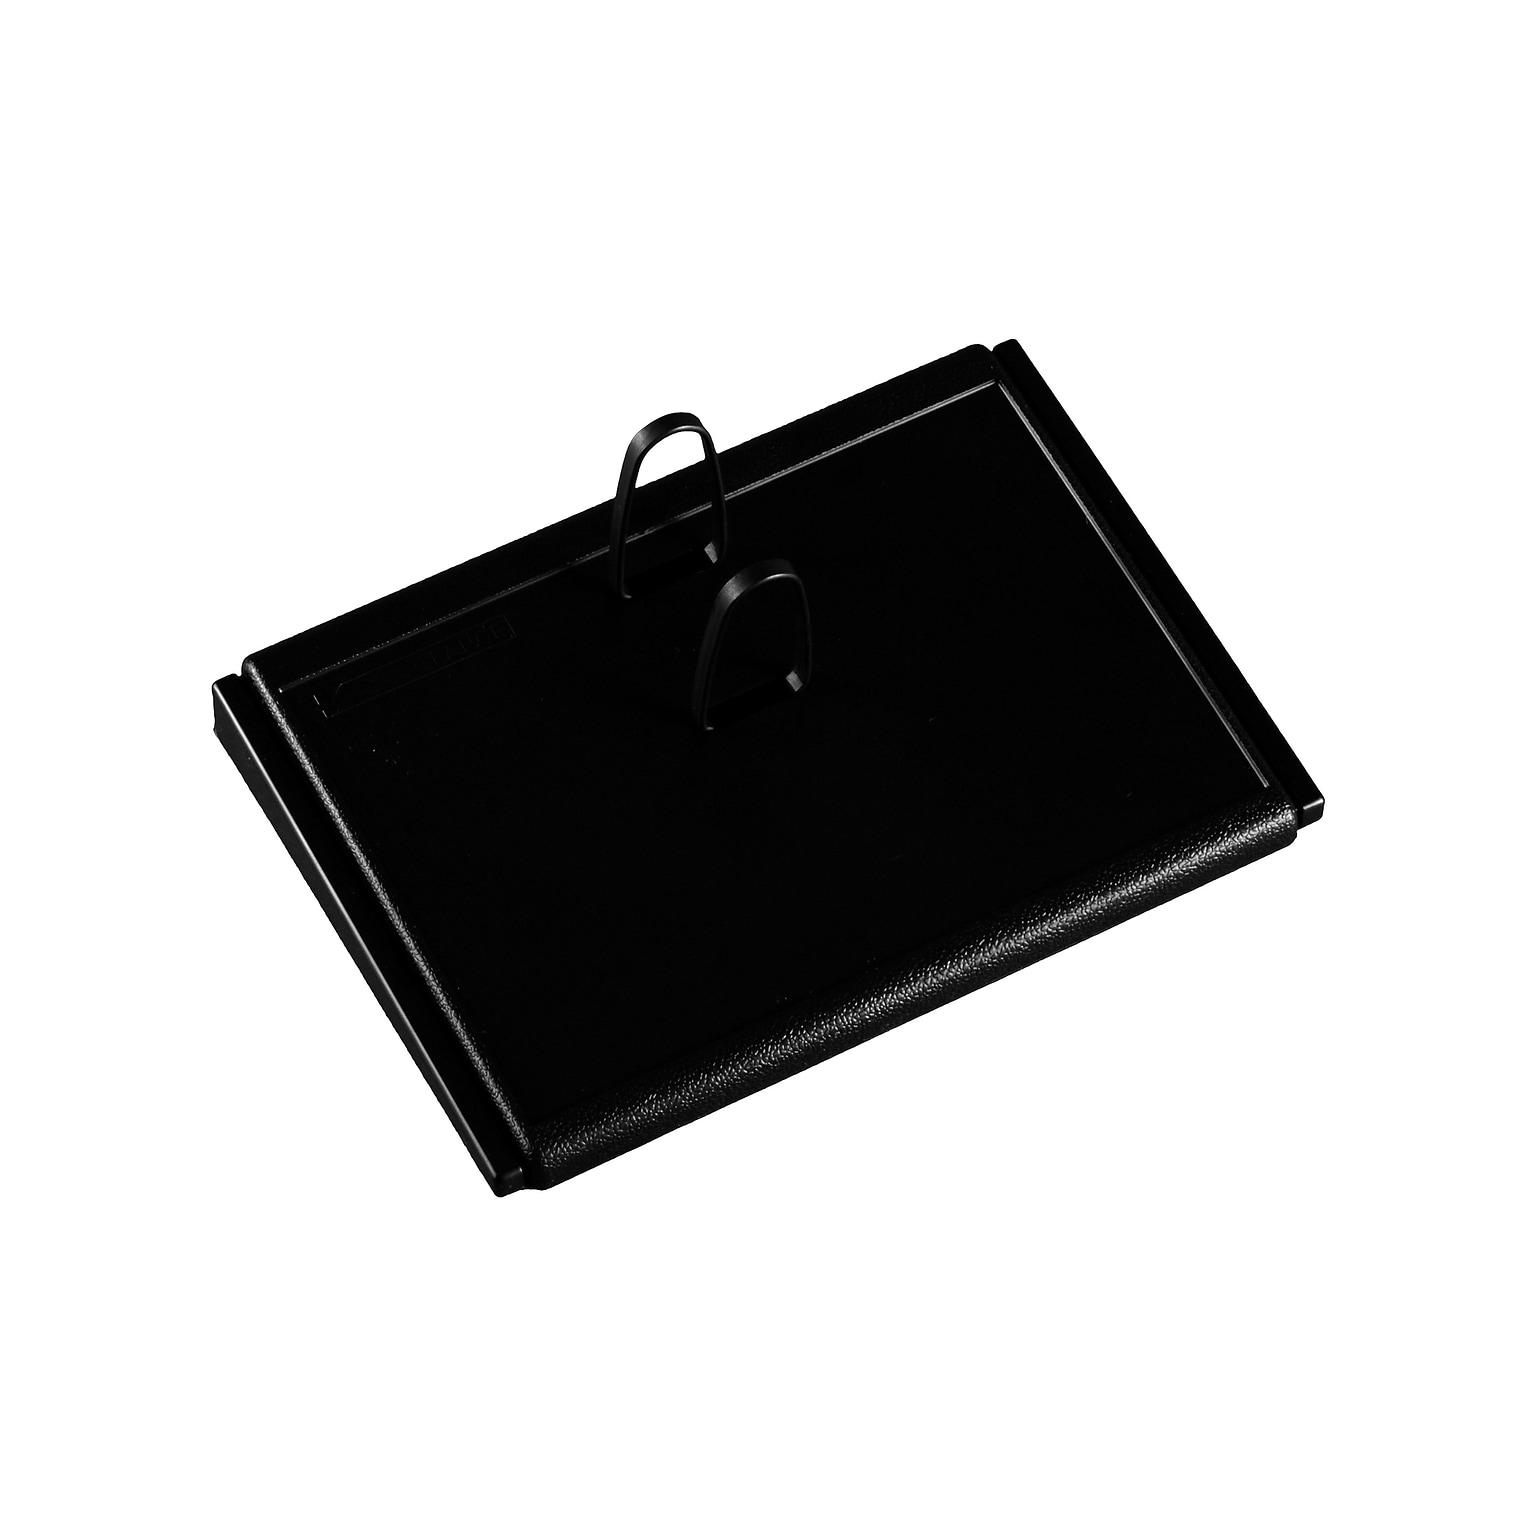 AT-A-GLANCE 19-Style Desk Base for 3.75H x 3W Refills, Black (E19-00)